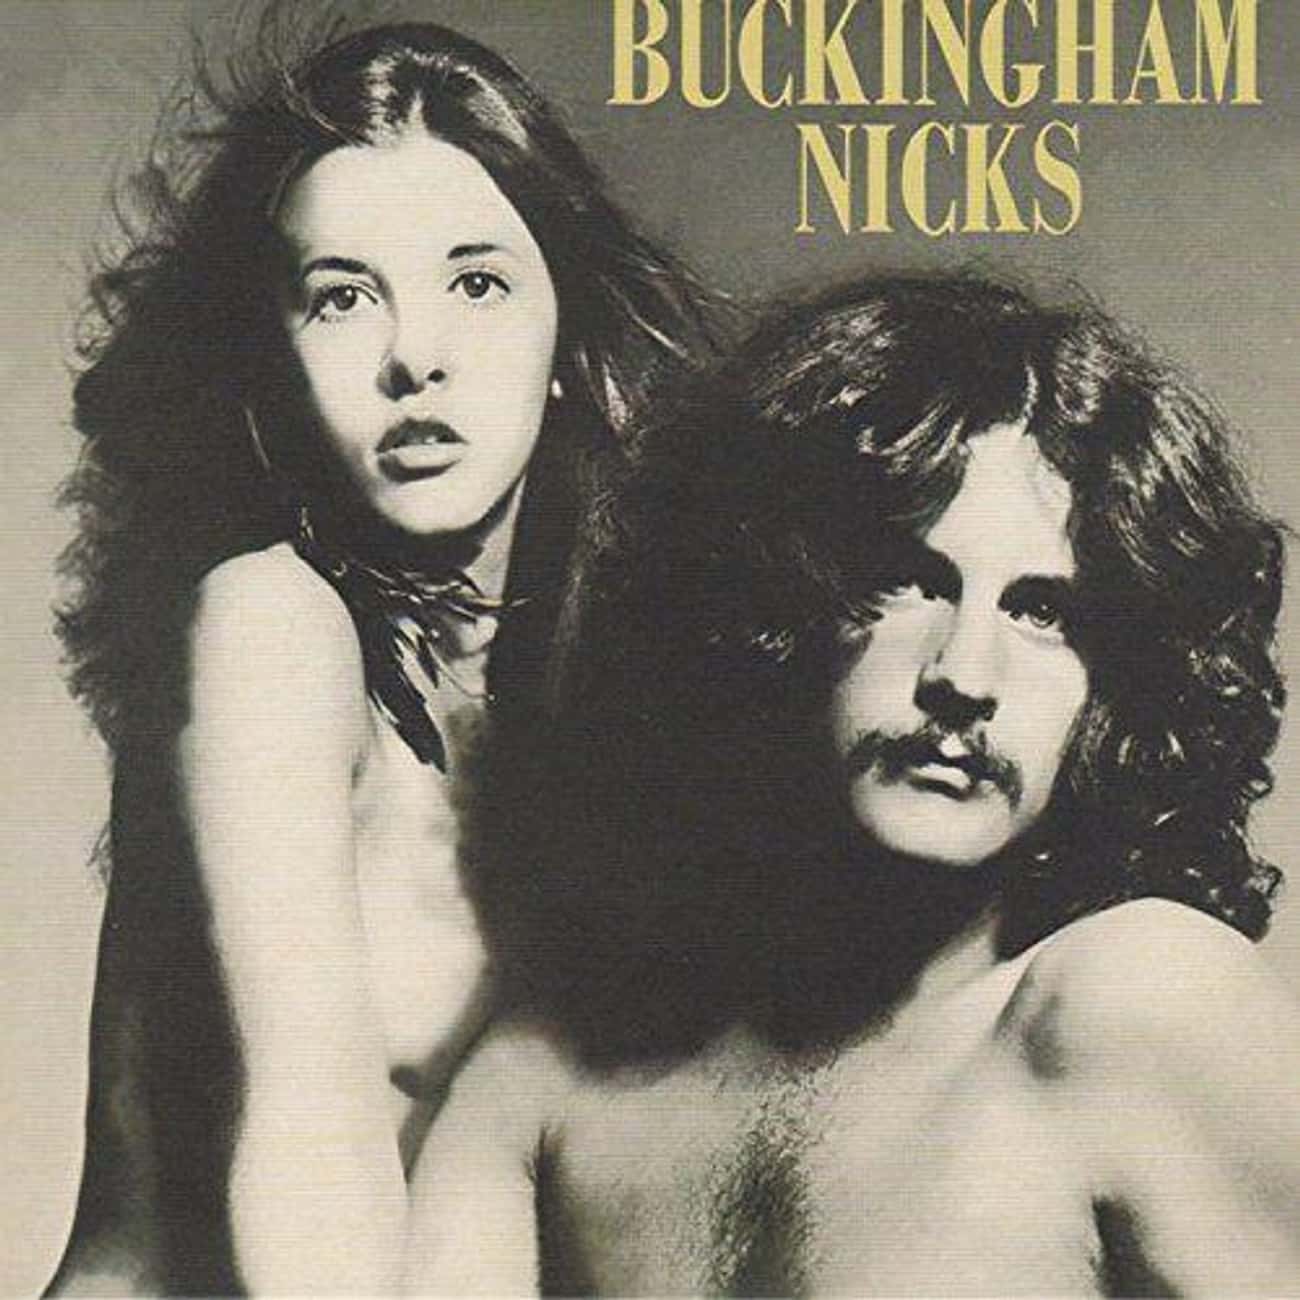 Nicks And Buckingham Met When She Interrupted His Performance At A High School Party